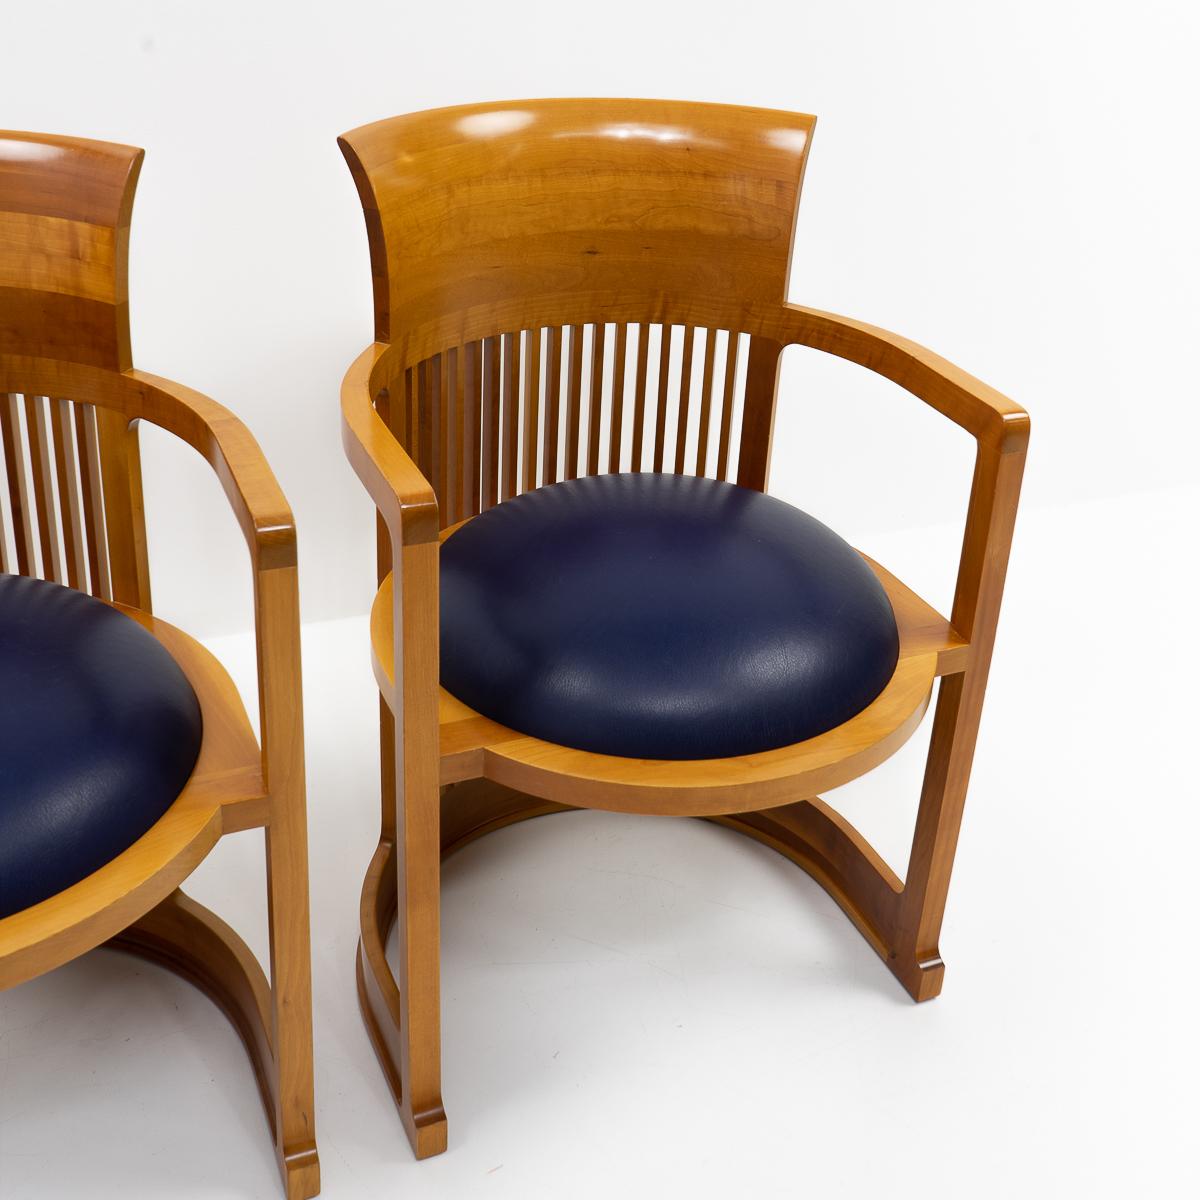 Modern Design Classic Barrel Chair by Frank Lloyd Wright for Cassina, 1980s